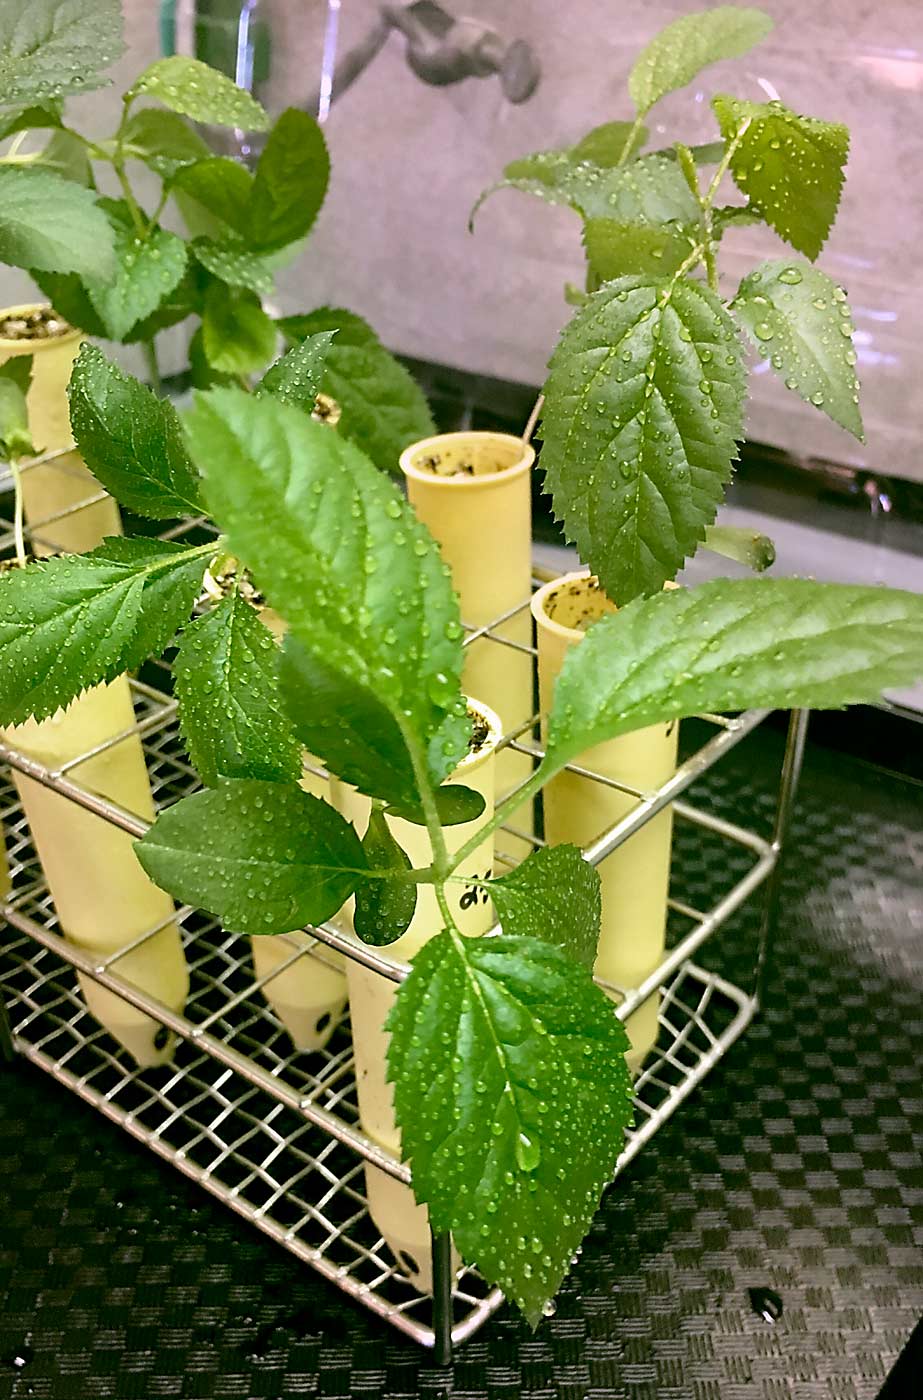 DeGenring sprayed chitosan on apple seedlings as part of a lab trial. Other trials include commercial orchards in New Hampshire and research blocks in Pennsylvania. So far, chitosan’s effects on apple scab look promising. (Liza DeGenring/University of New Hampshire)